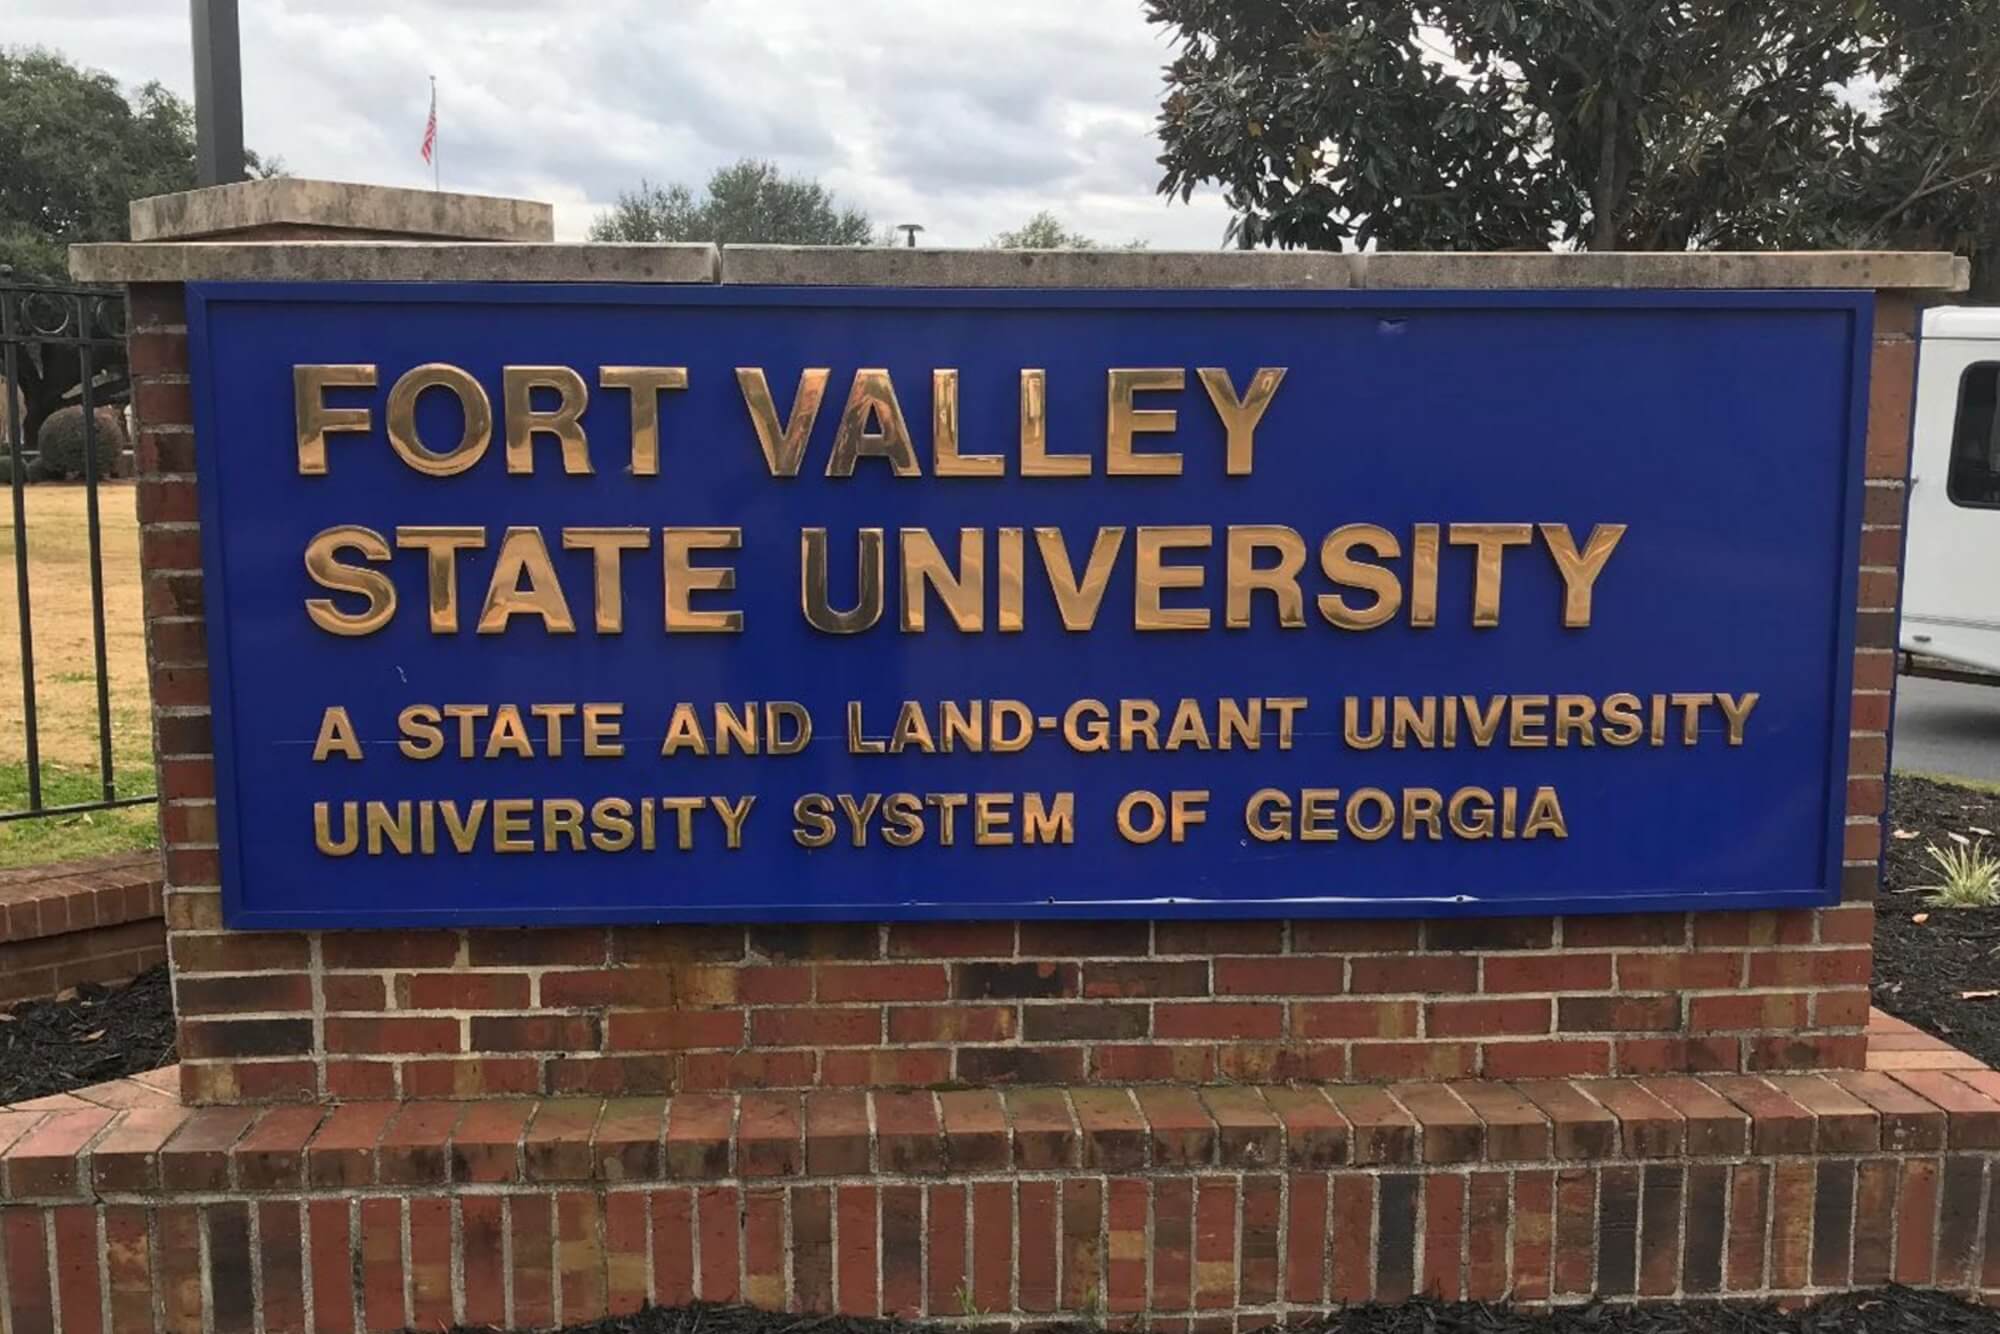 fort valley state university banner web